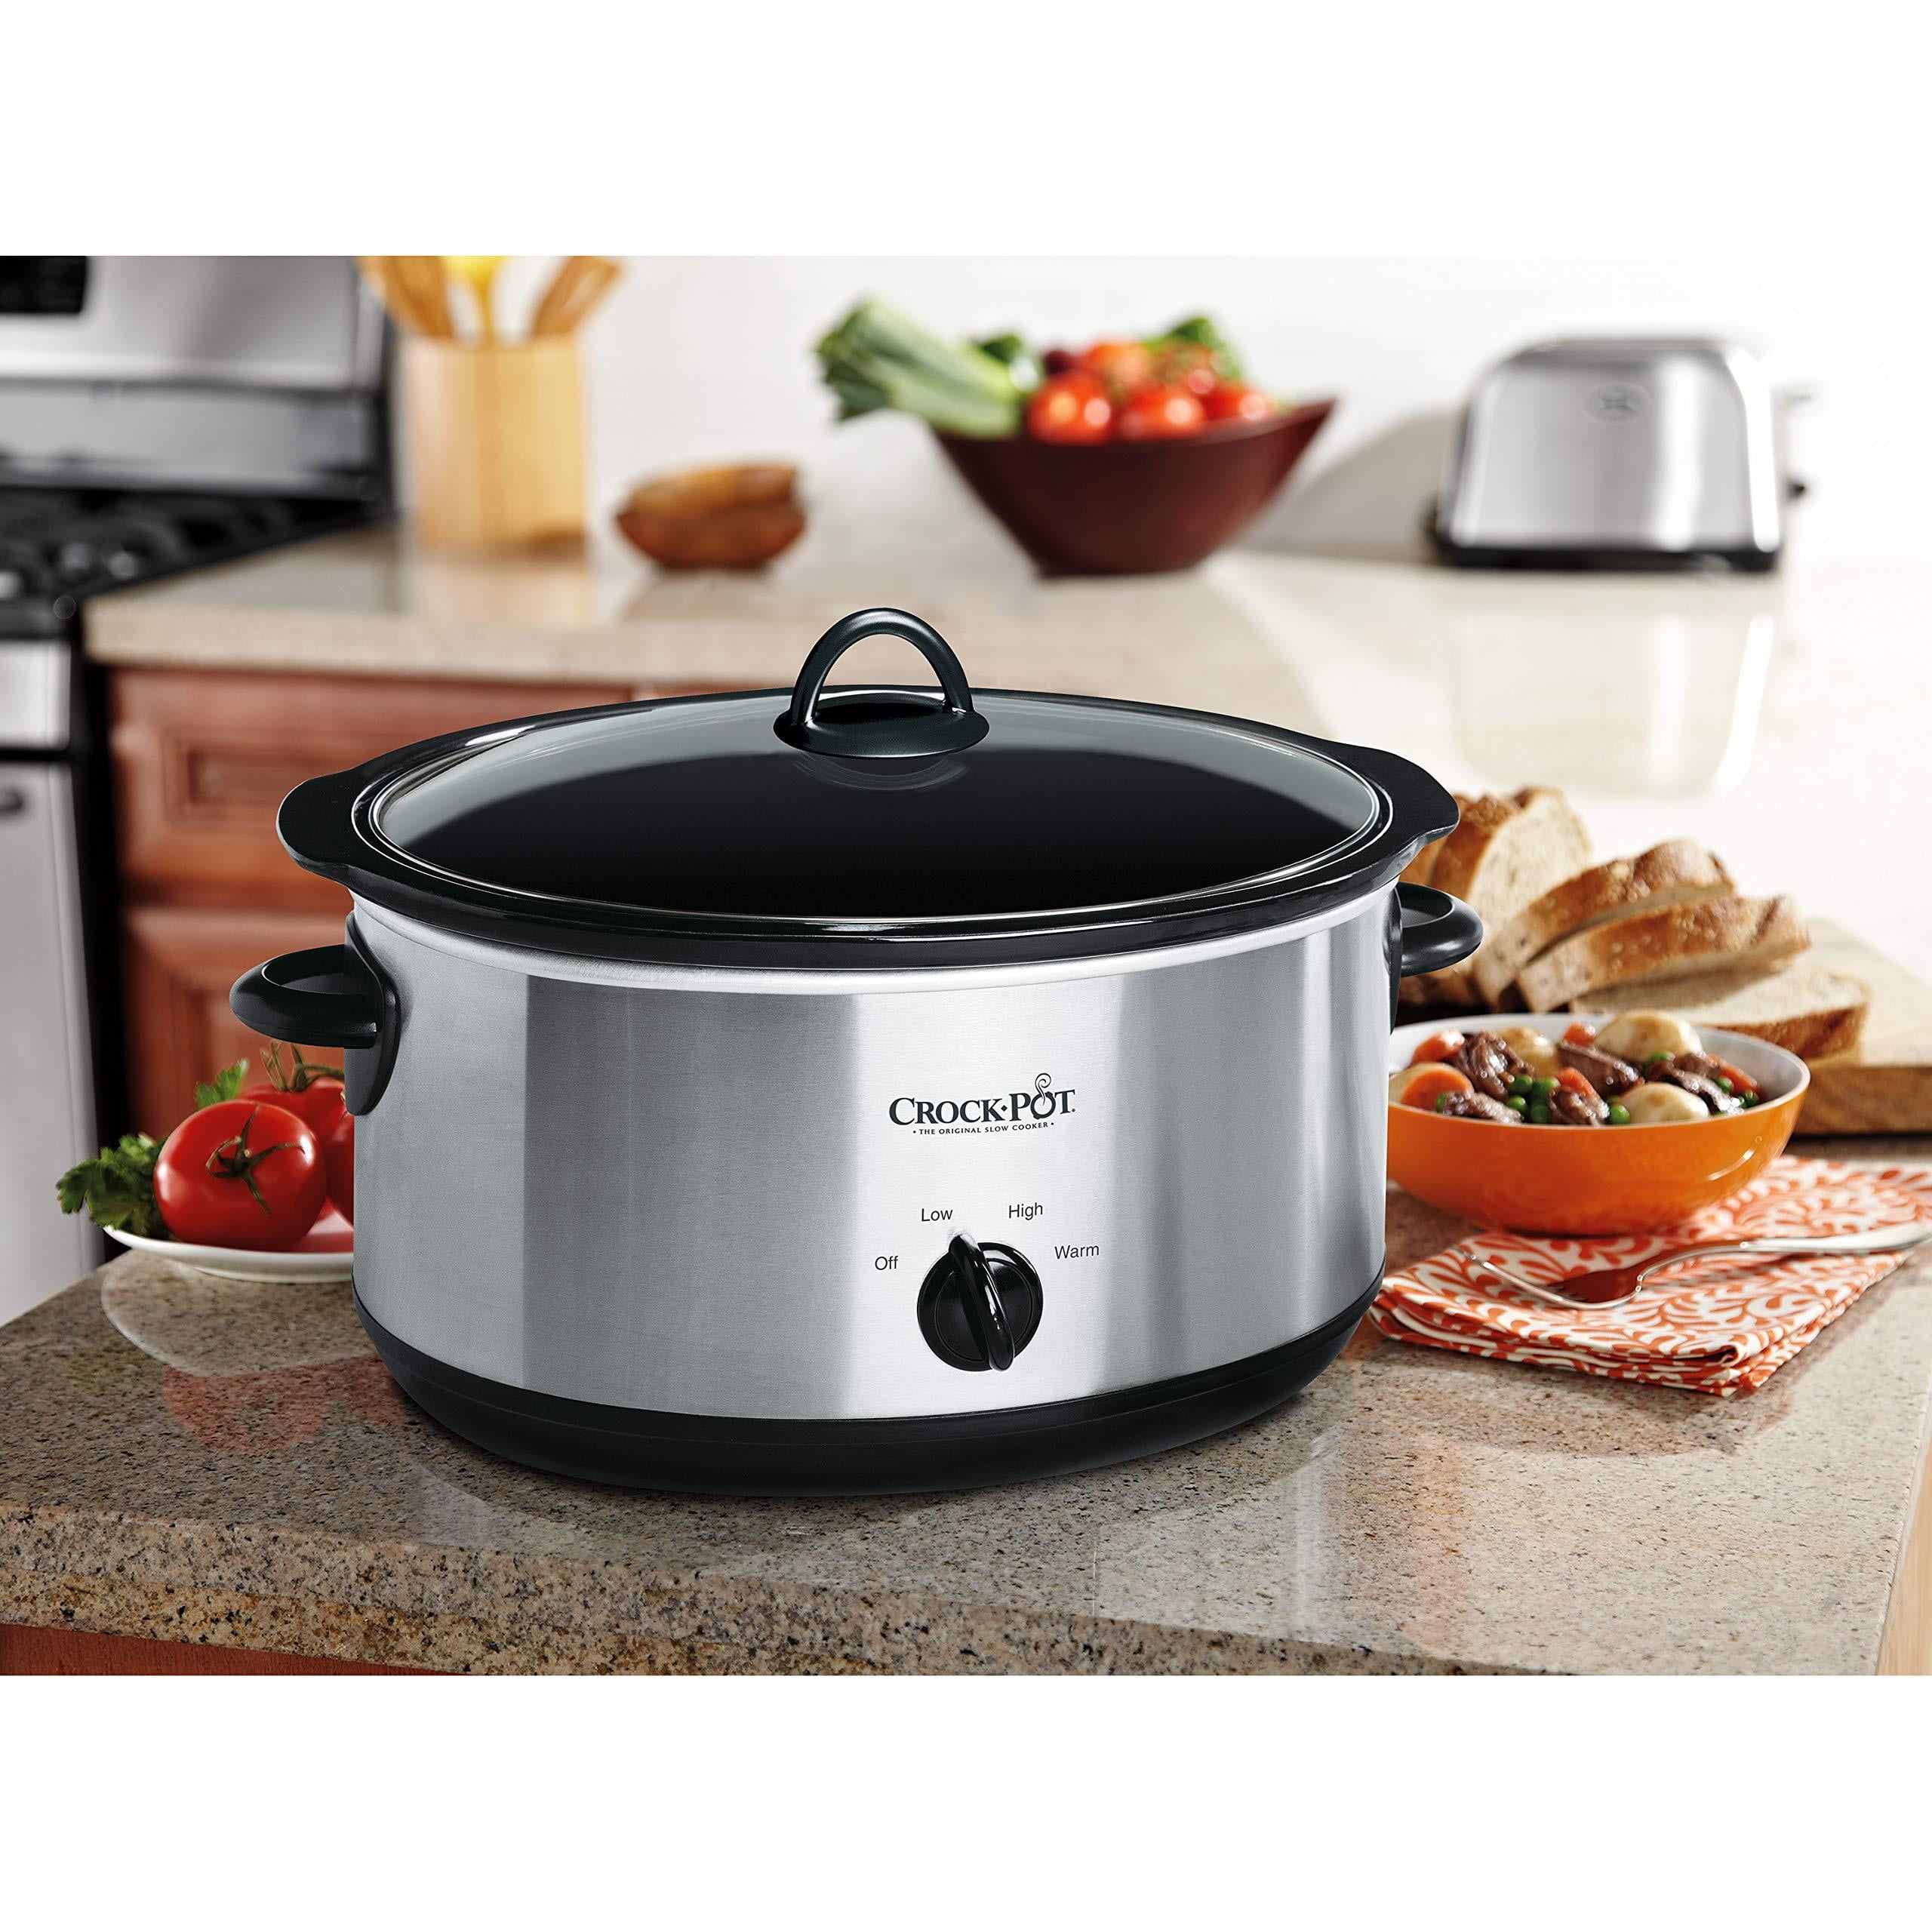 Kalorik SC41175SS Stainless Steel 8qt. Digital Slow Cooker with